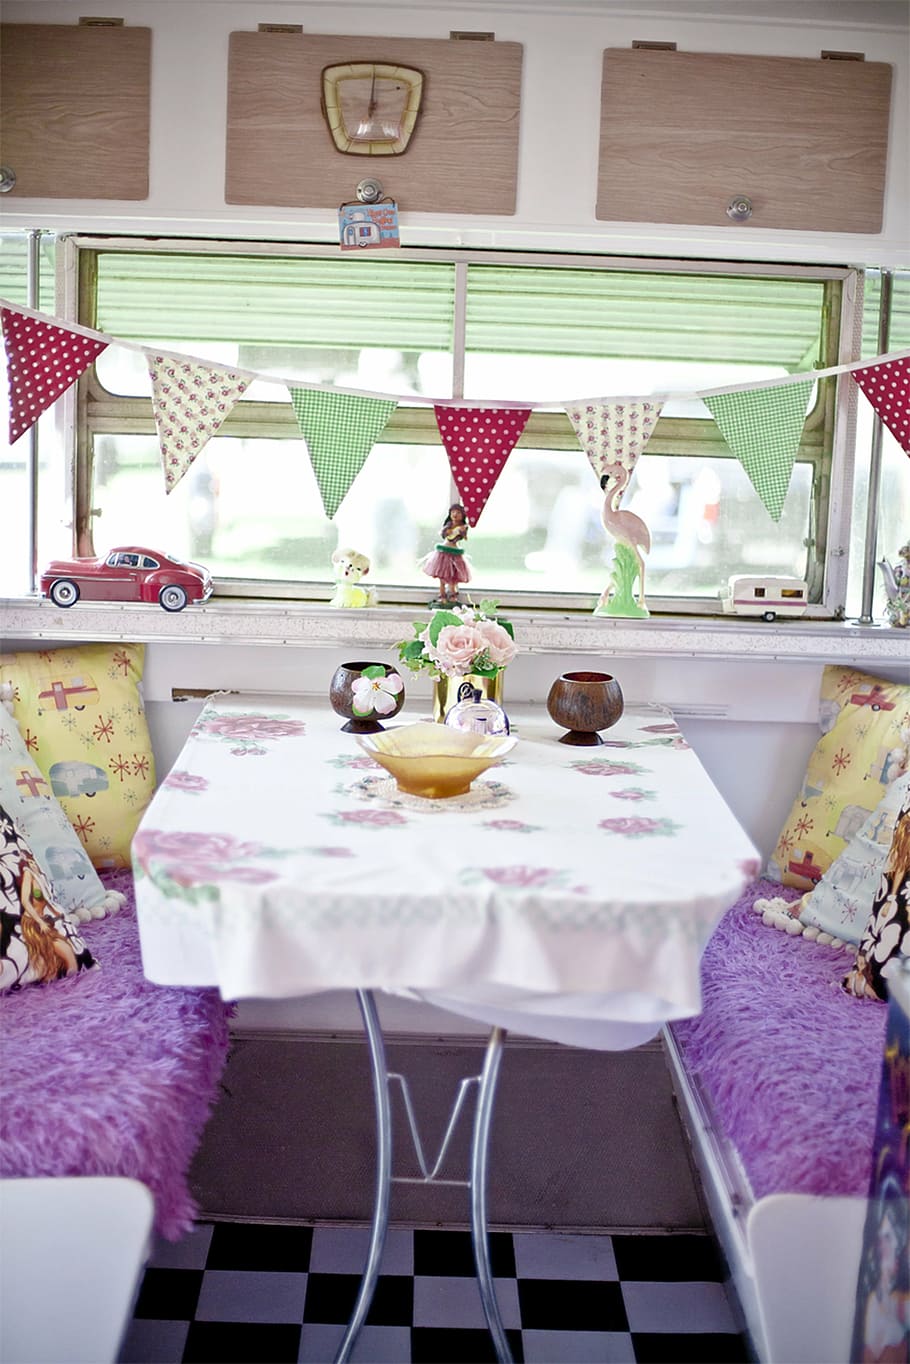 white, red, floral, table cloth, mobile home, caravan, rv, kitchen, dining table, automobile camper